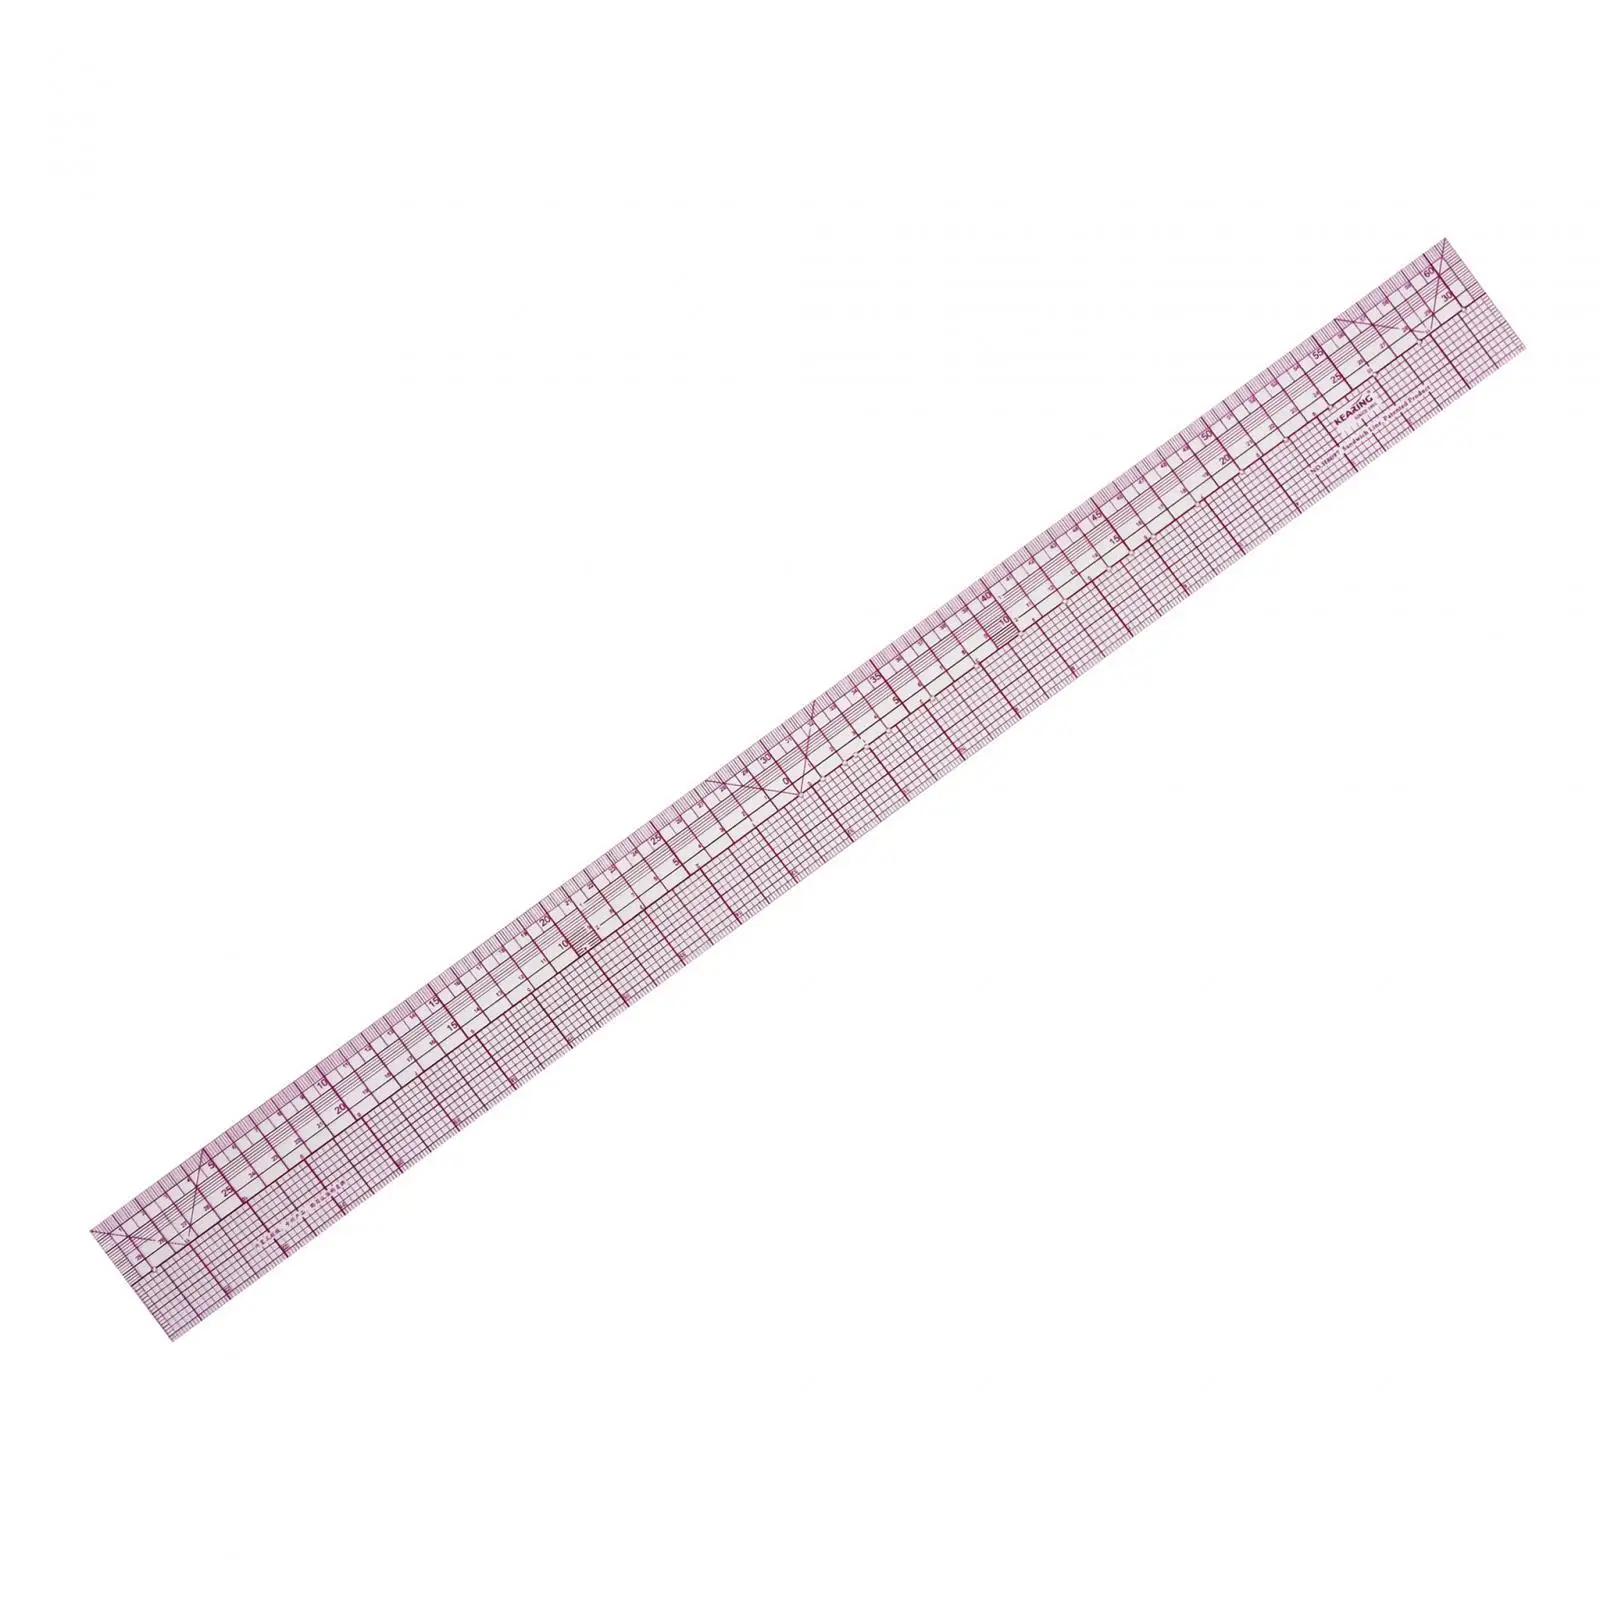 Patchwork Ruler Multifunctional Grading Rulers Clear Ruler for Crafts Making DIY Tools Sewing Accessories Precision Measurements